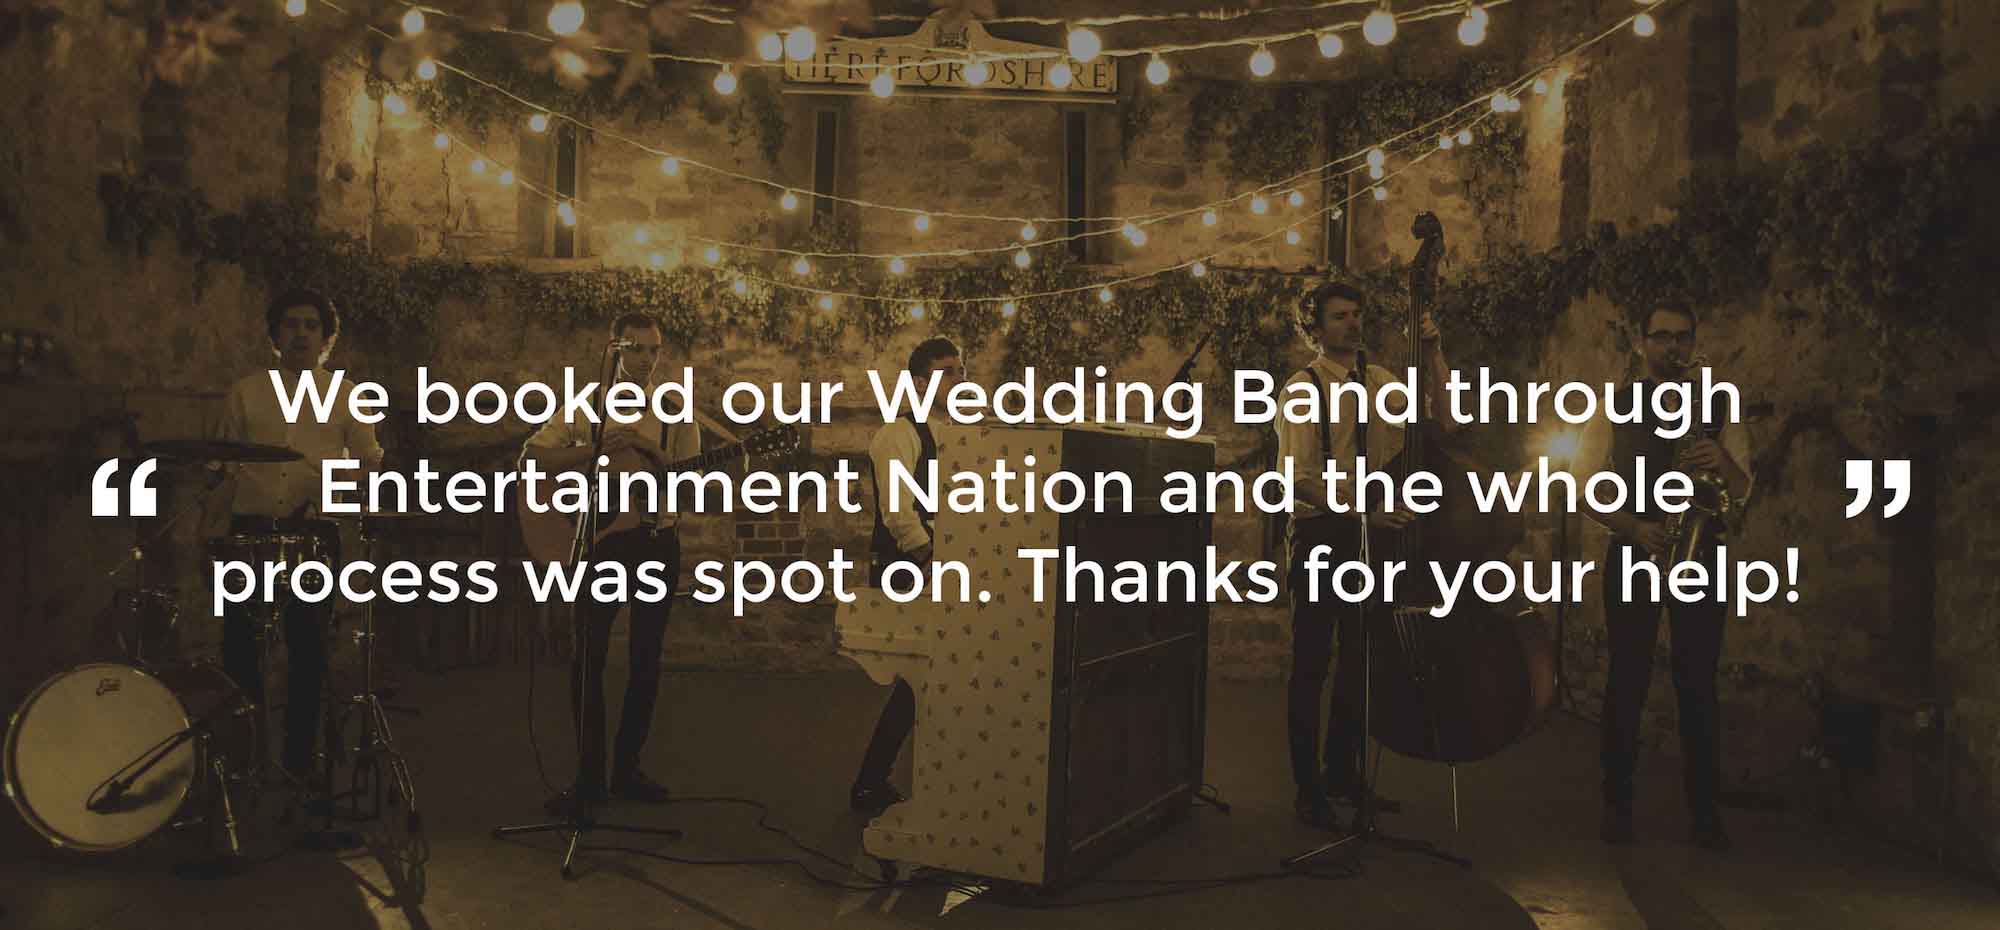 Client Review of a Wedding Band Cambridgeshire